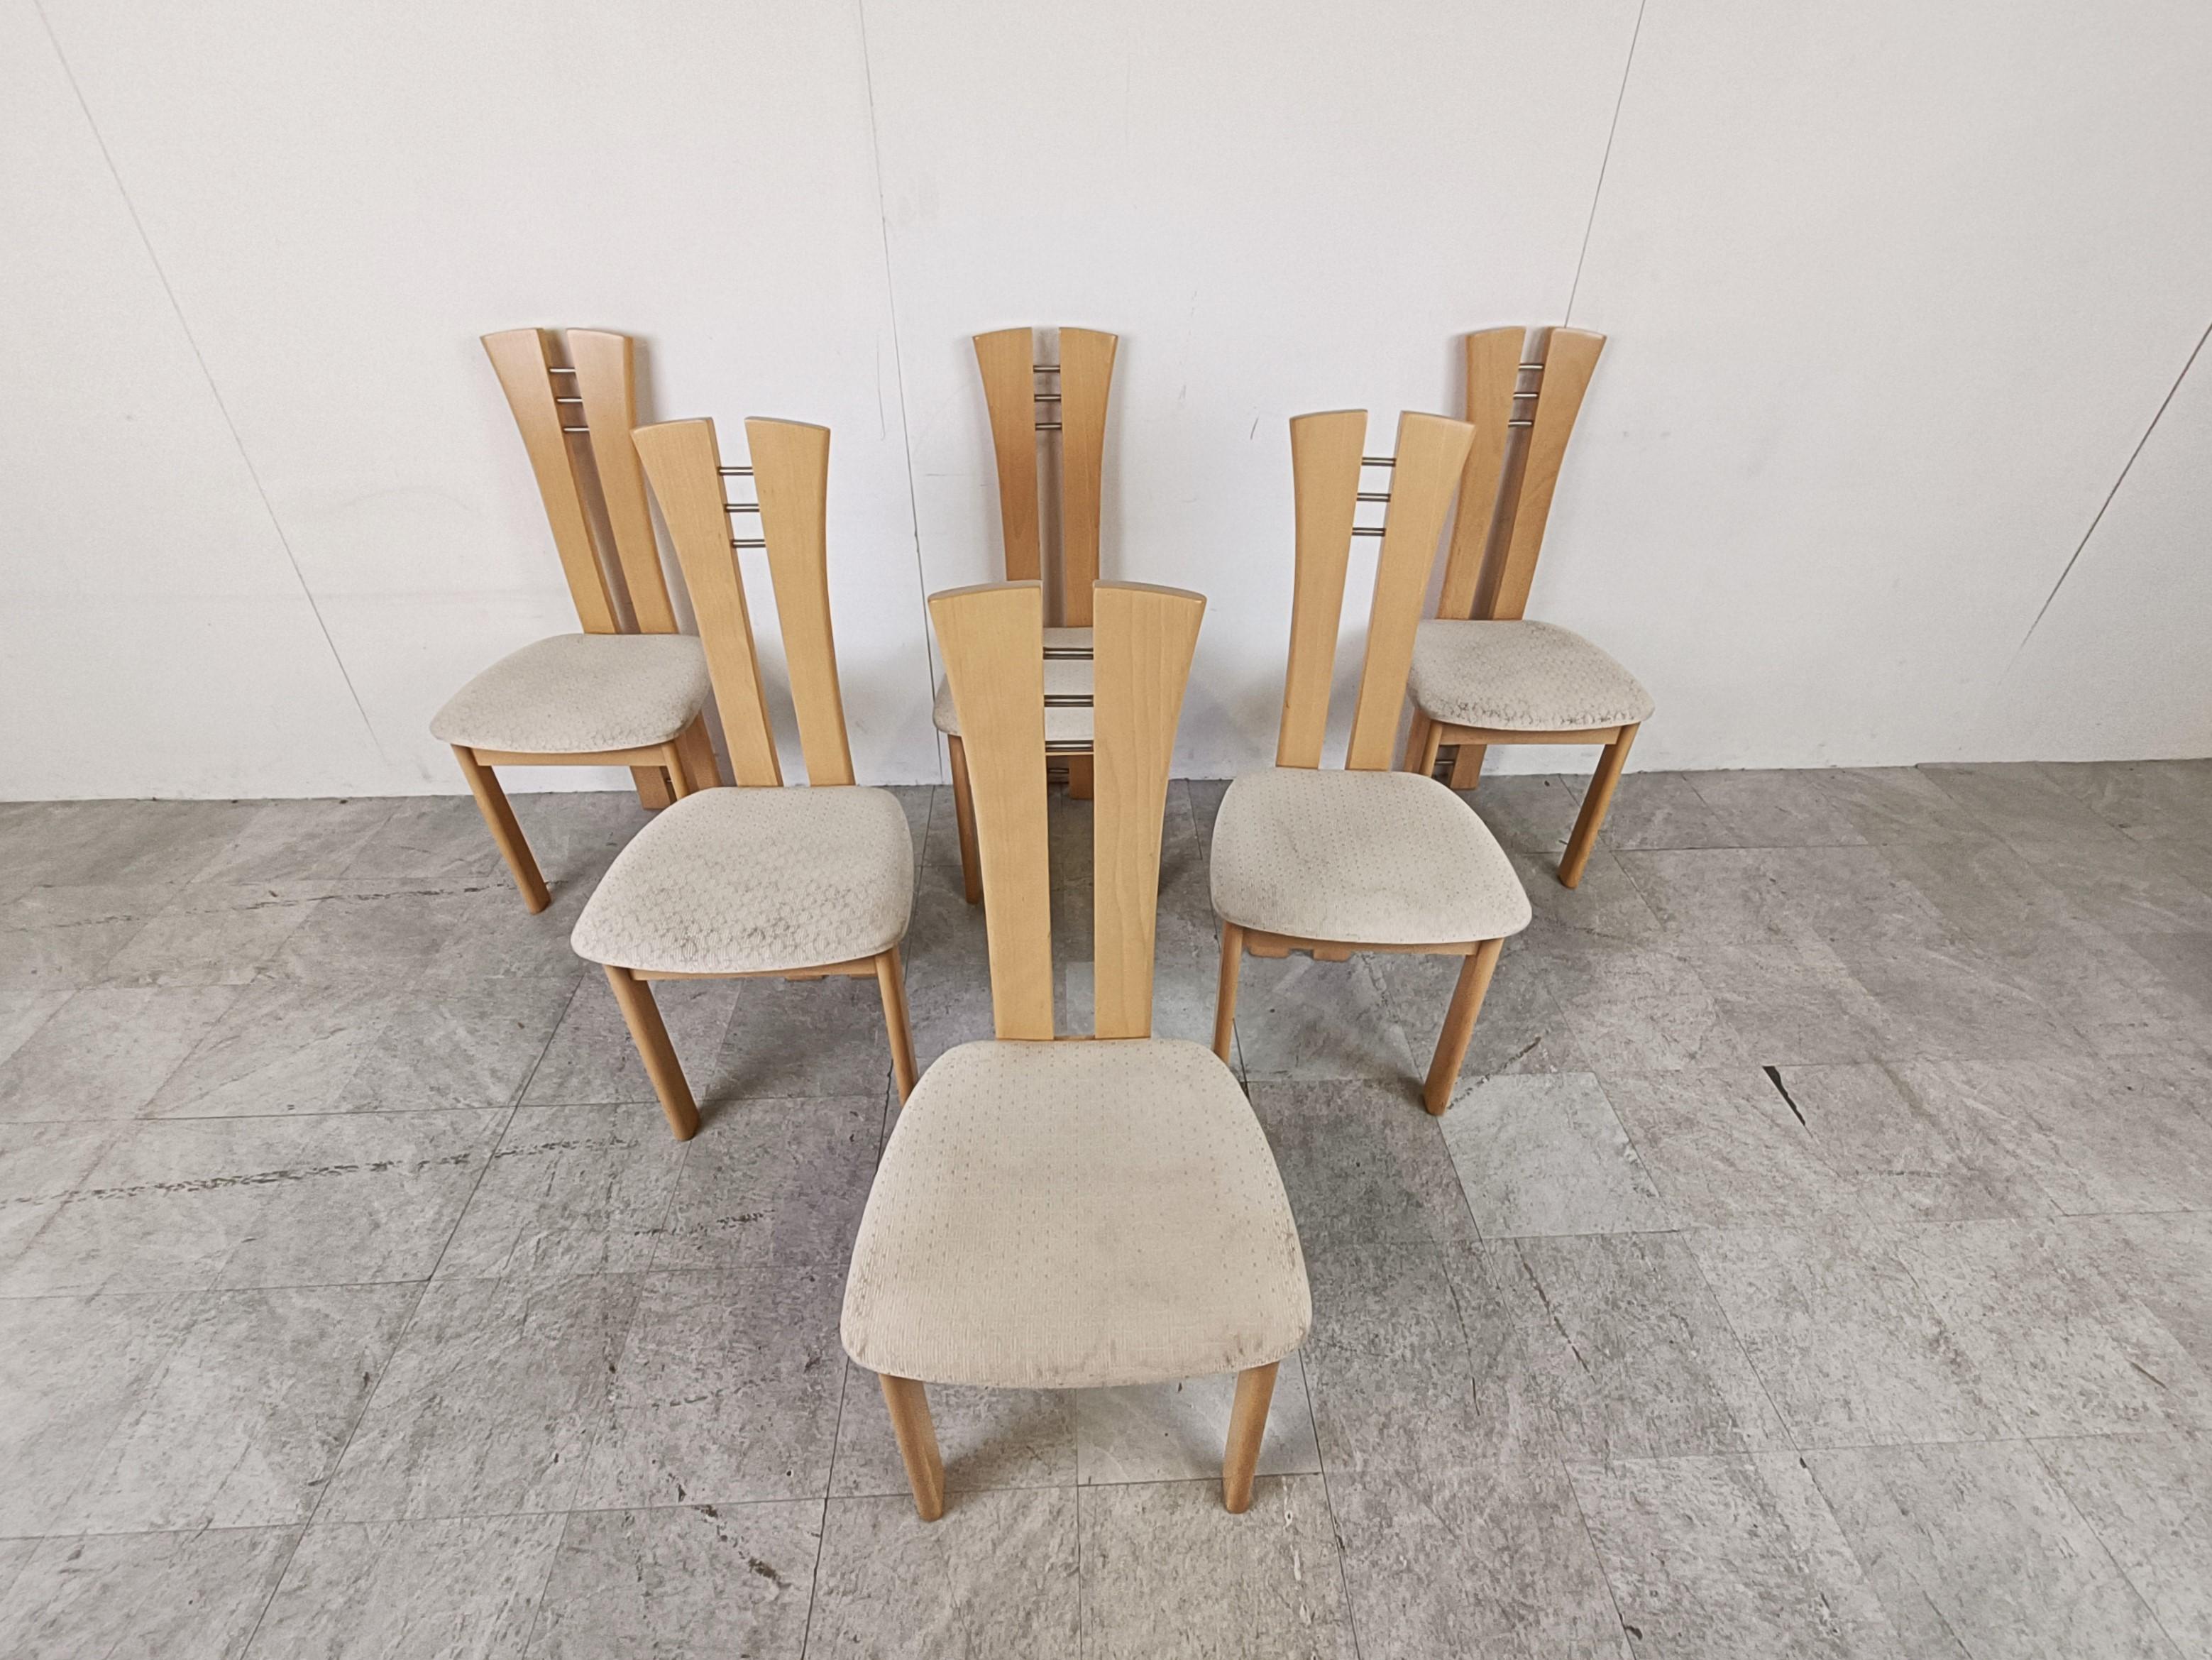 Belgian design high back wooden dining chairs.

The chairs have beautiful oak frames with a split back going all the way down to form the legs and come with their original fabric seats.

Dimensions: 
Height: 100cm/39.37